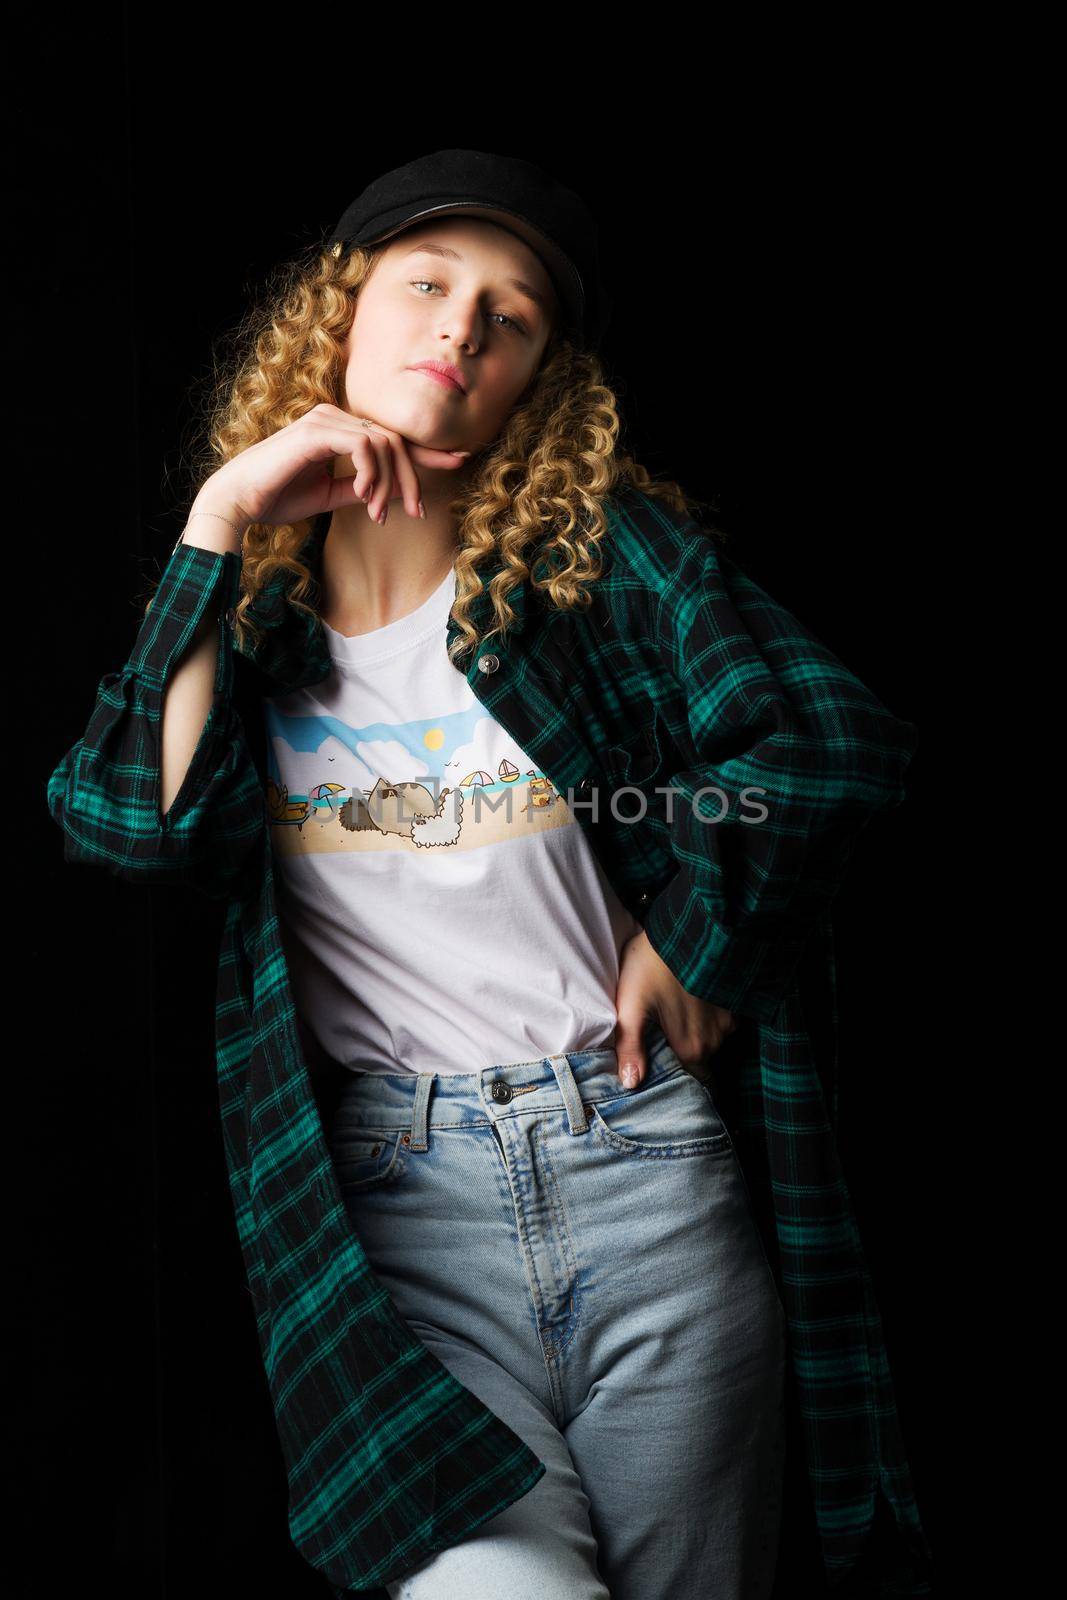 Charming girl posing keeping hand under her chin. Shot of stylish blonde curly girl in fashionable outfit looking at camera. Young woman wearing plaid shirt standing on black background